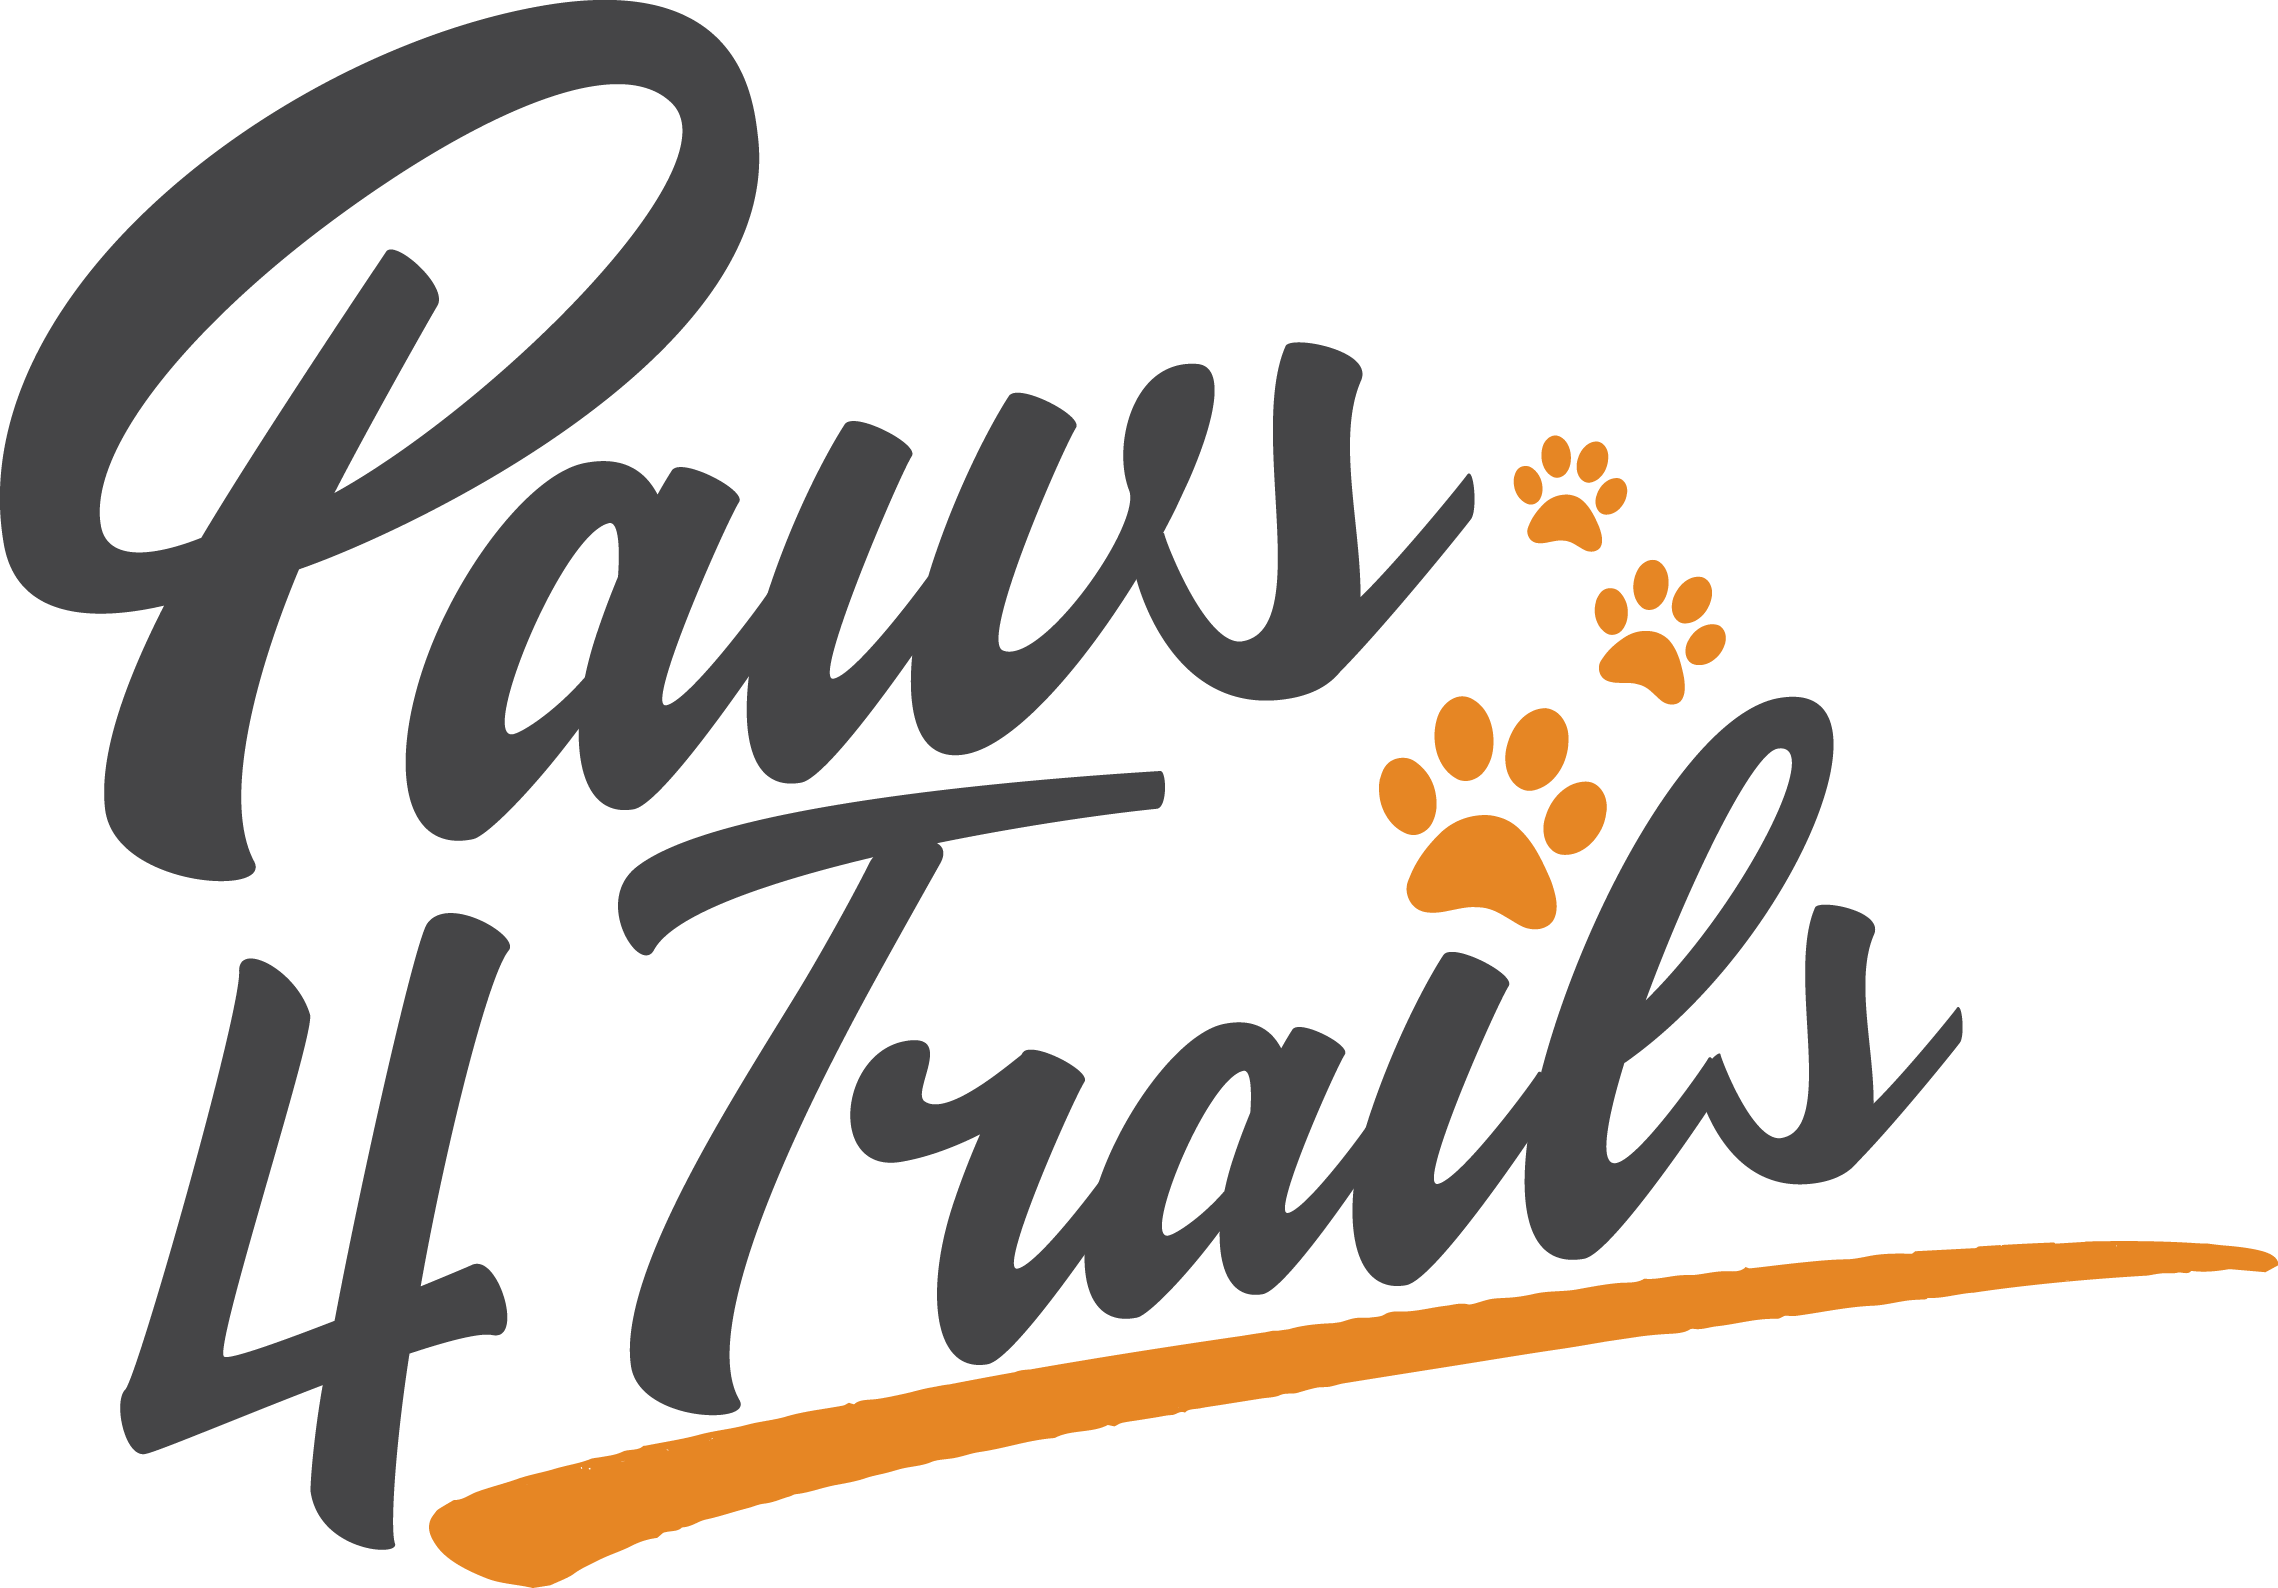 Paws 4 Trails